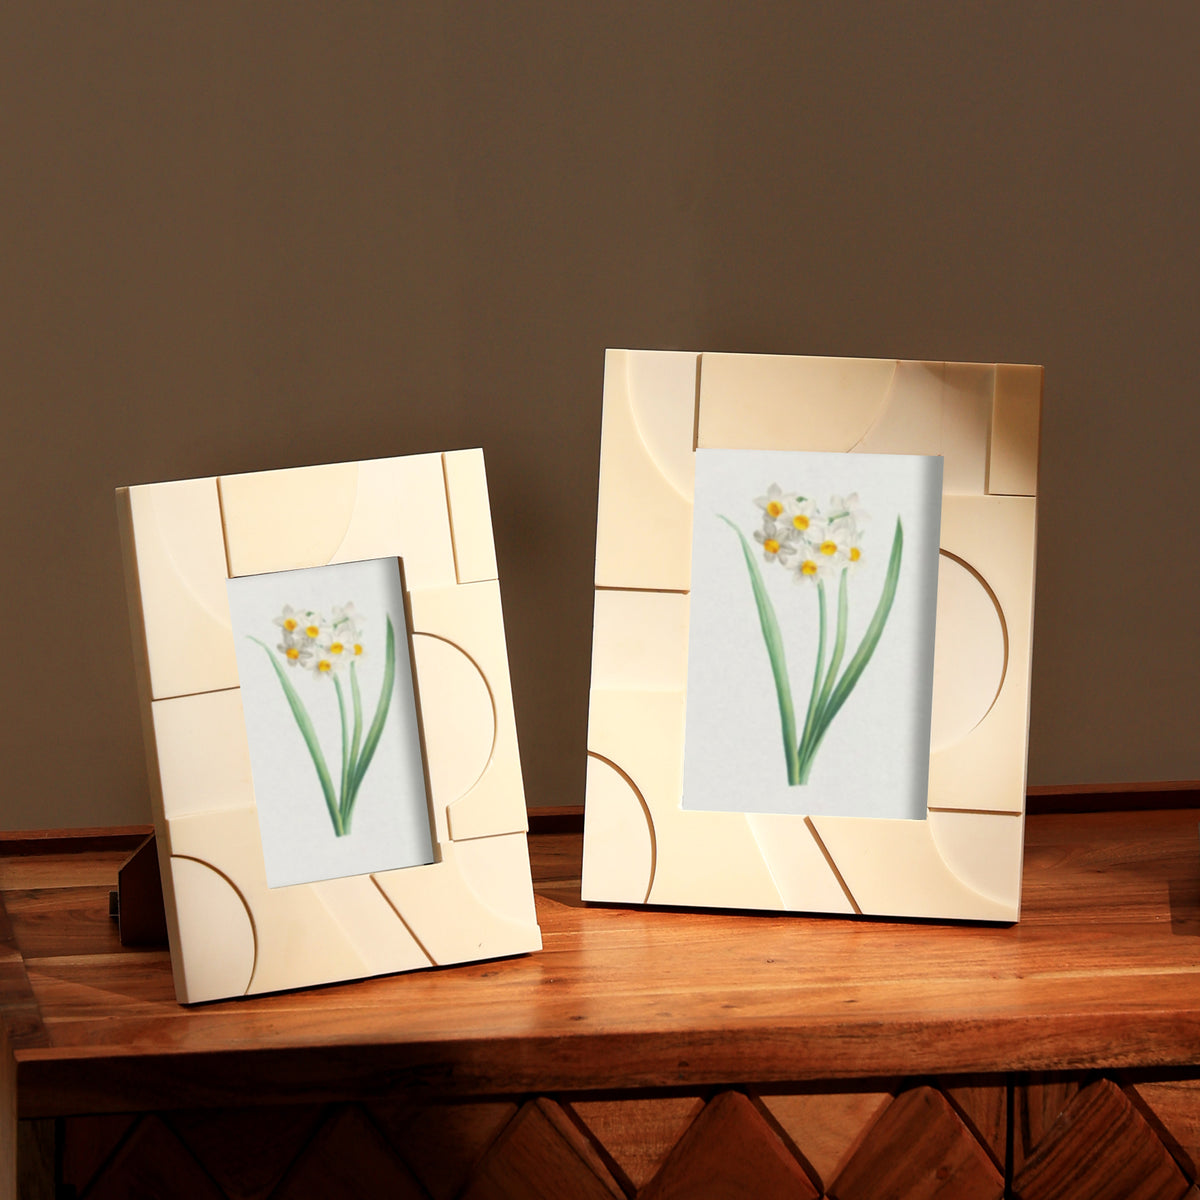 Abstract 3D Cut Photo Frame 5x7" & 4x6" Set Of 2